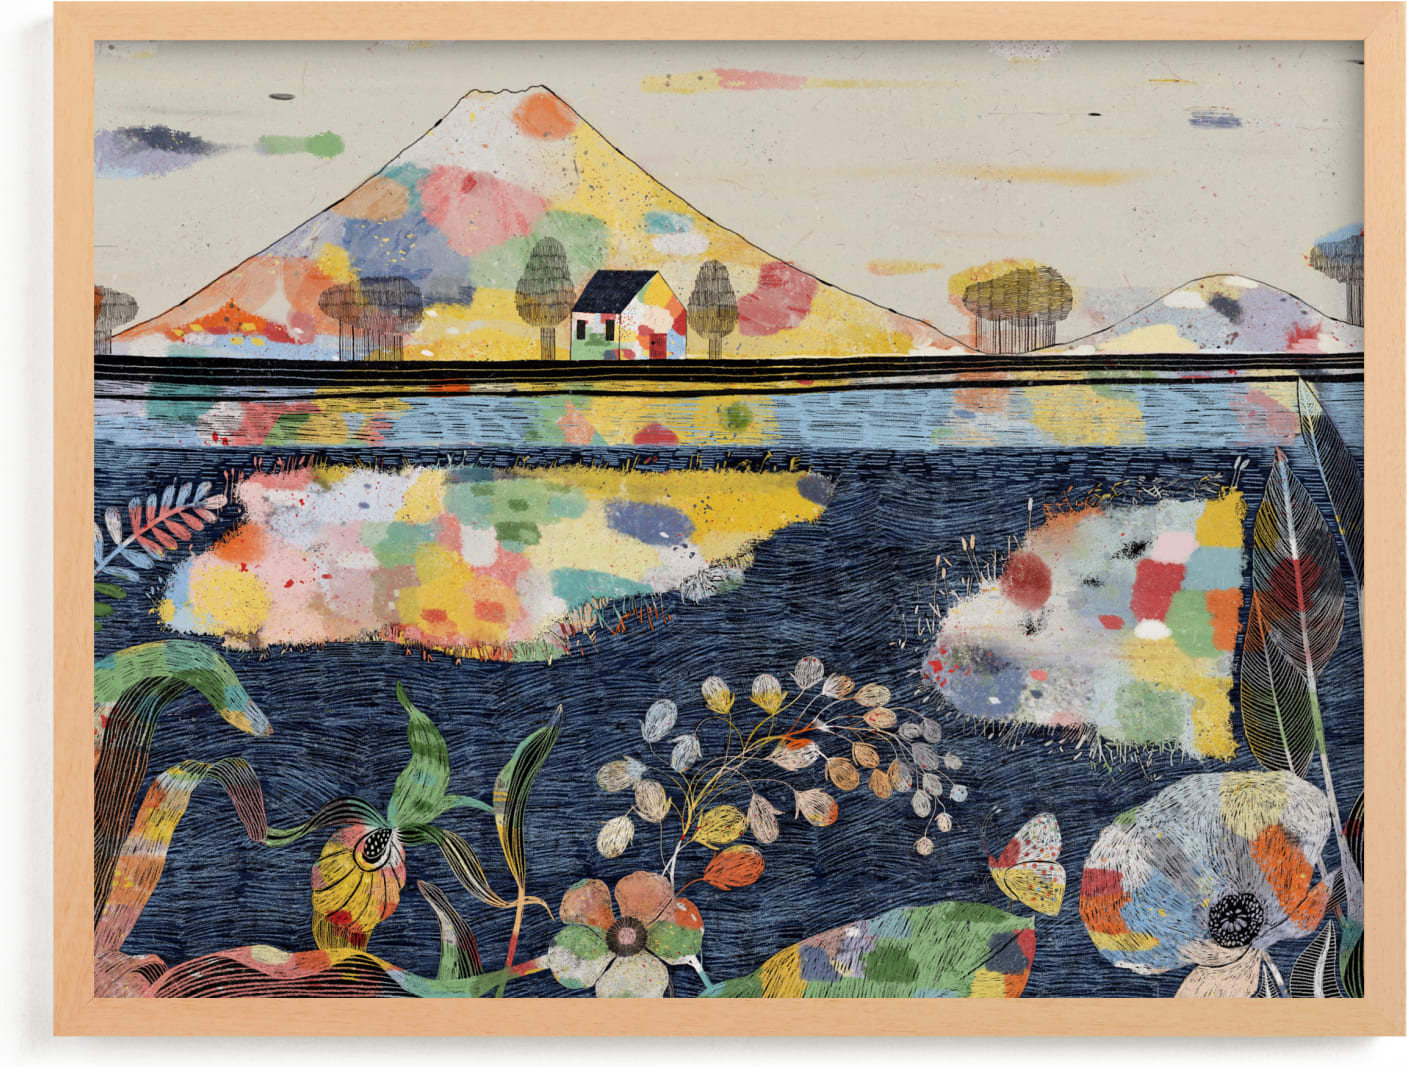 This is a colorful art by Lee-Anne Schmidt called The Lake House.